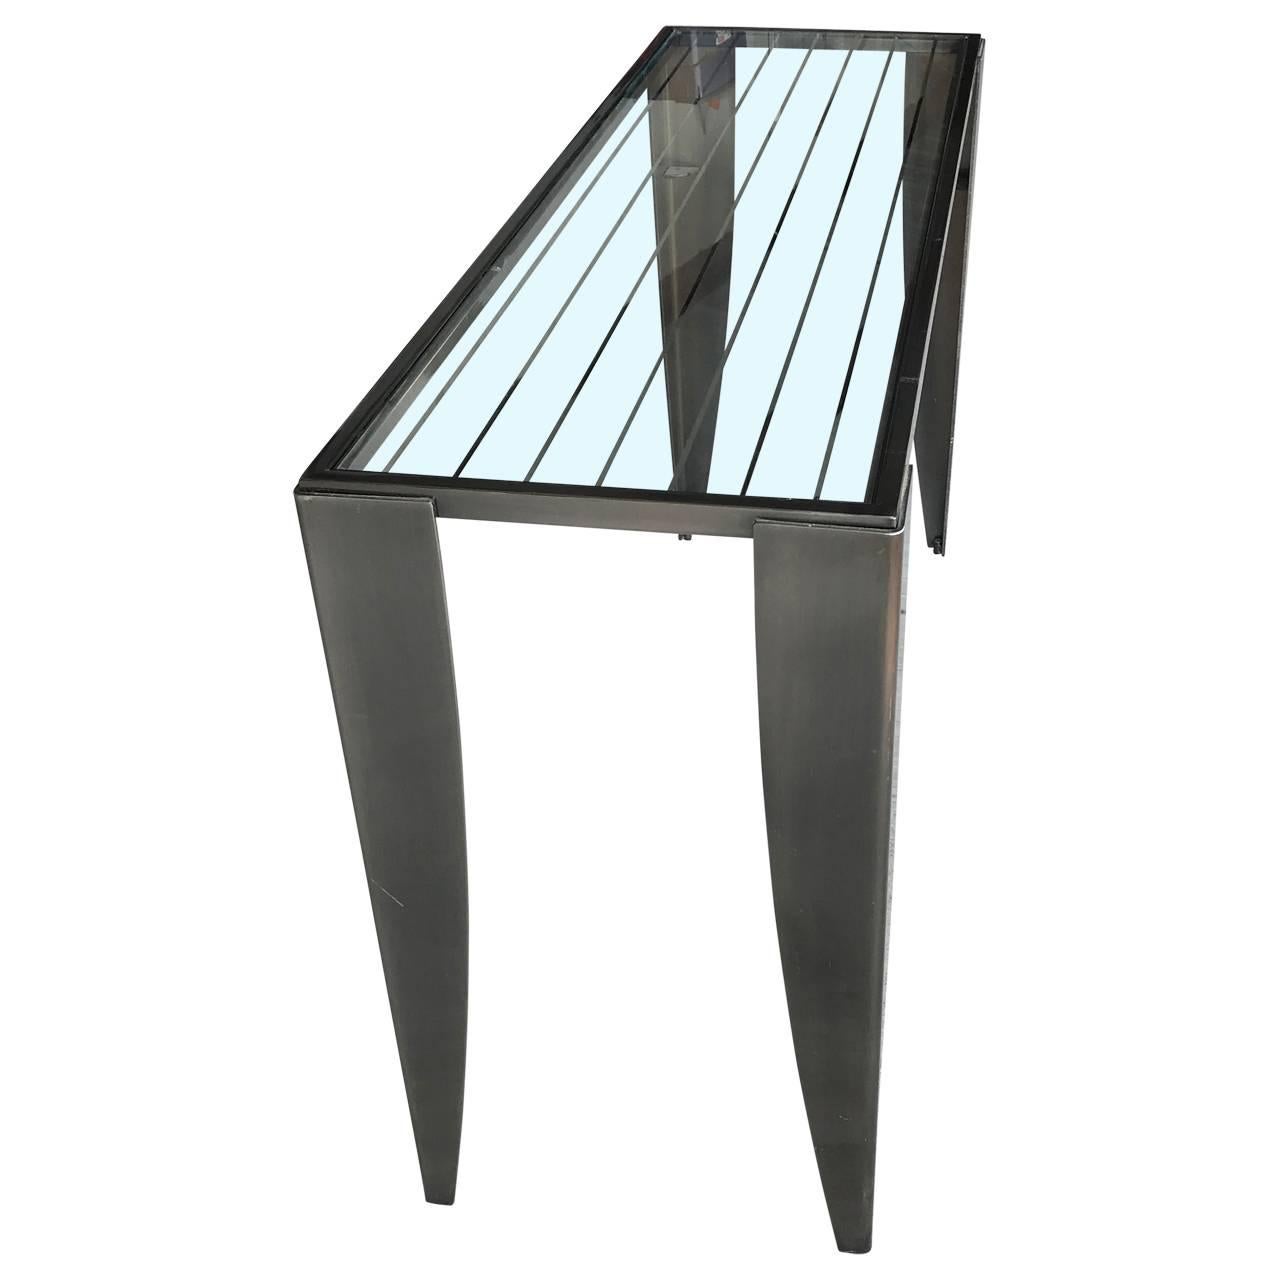 Sleek console table in brushed steel and glass top. Glass top has several etched silvered lines. There is the option of having second glass shelf installed, see detailed image 5 and 6.